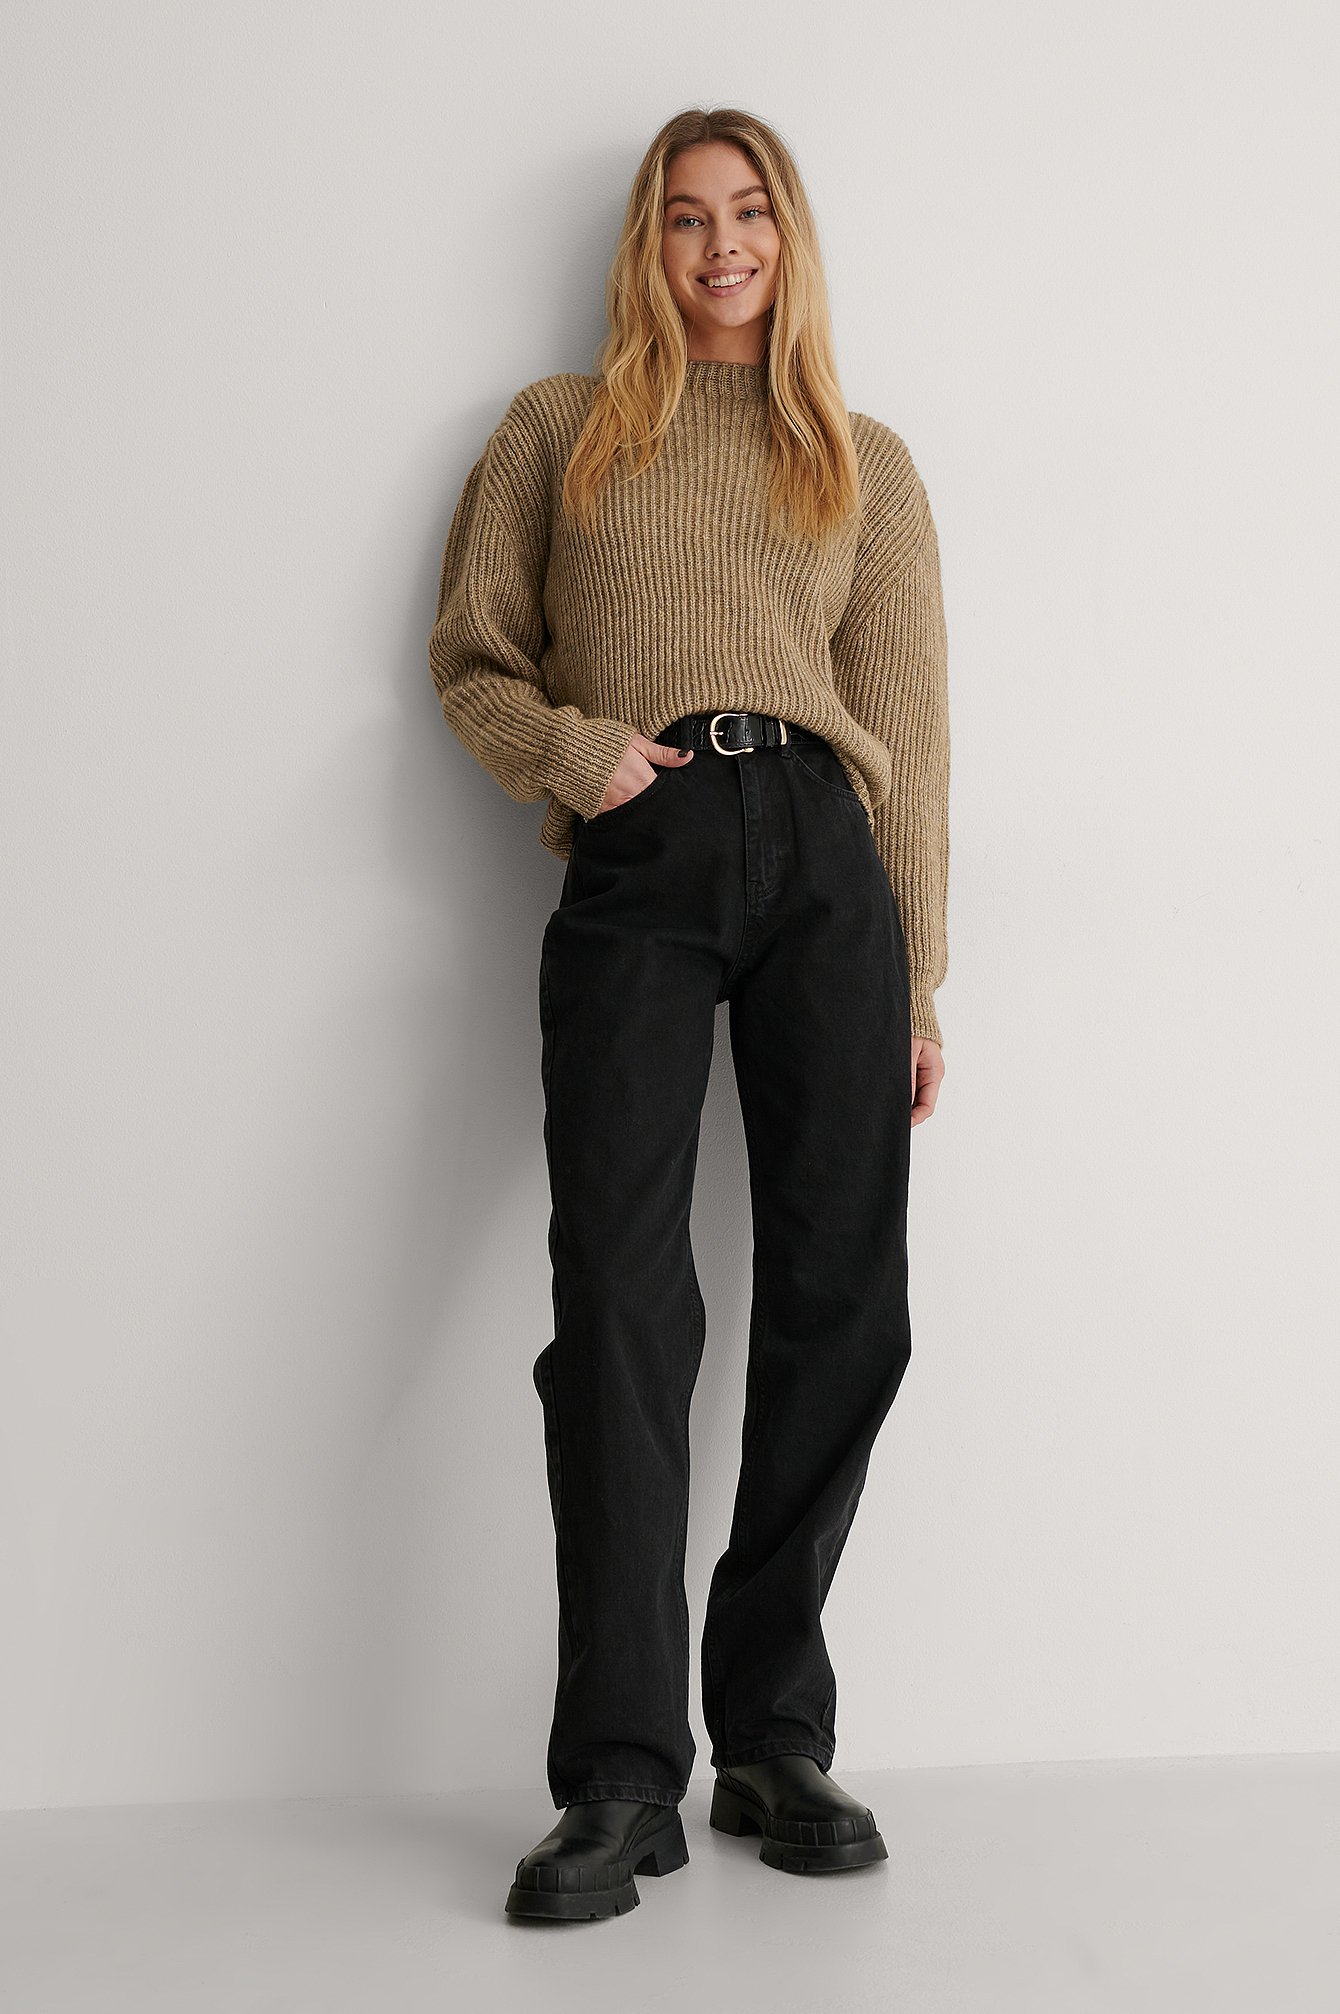 High Neck Ribbed Knitted Sweater Outfit.